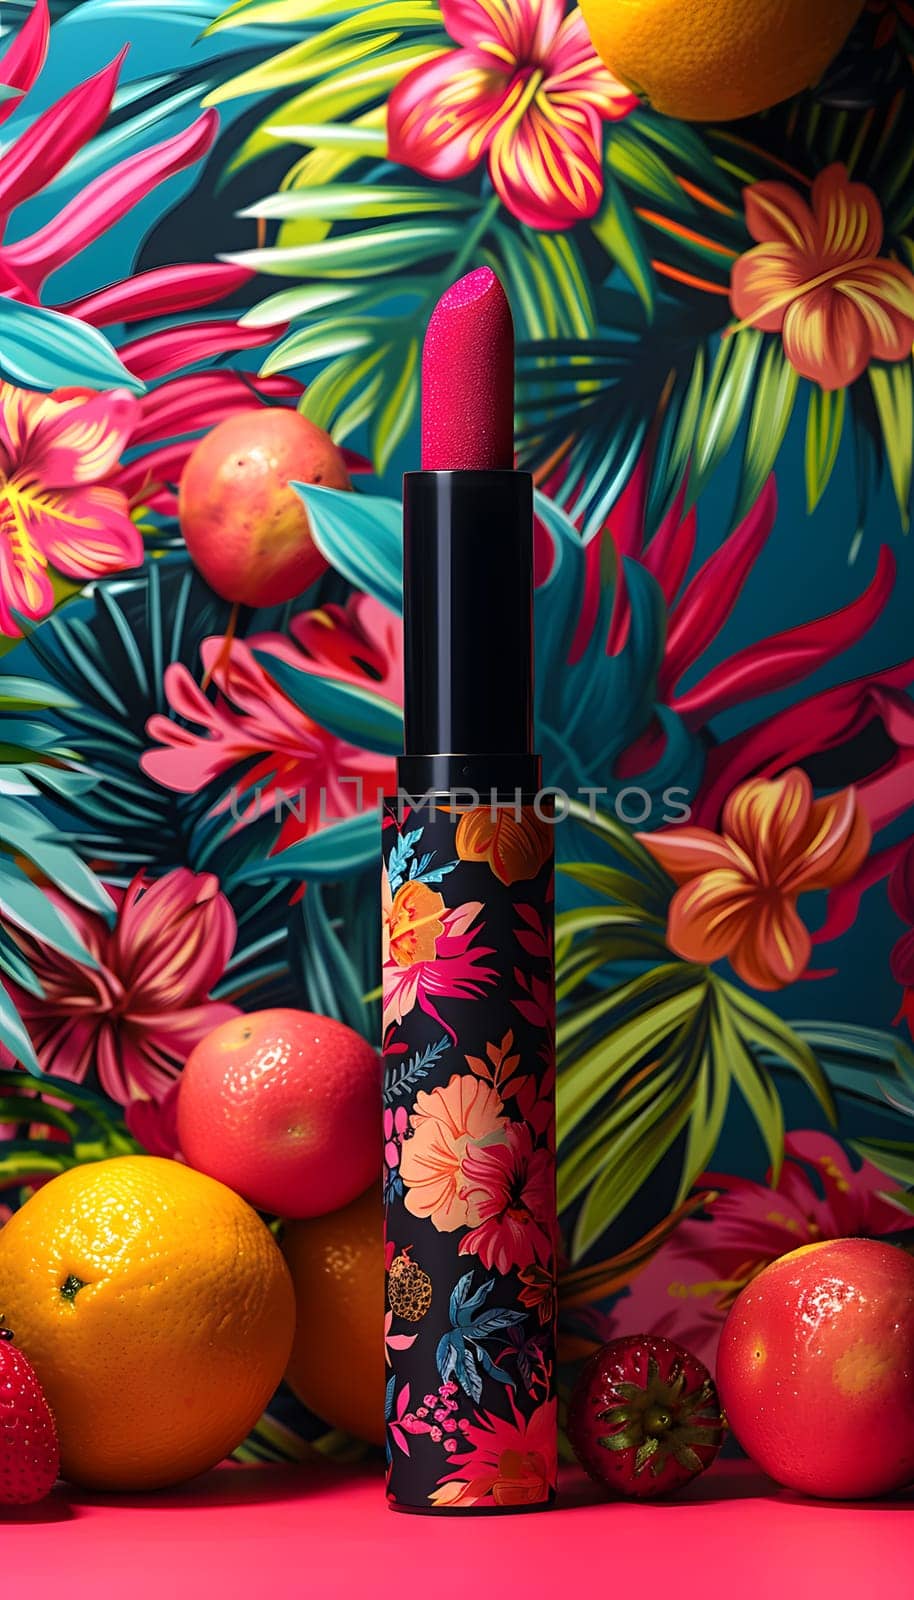 A vibrant pink lipstick is displayed against a backdrop of colorful flowers. The striking contrast between the lipstick and the floral background creates a beautiful and artistic composition